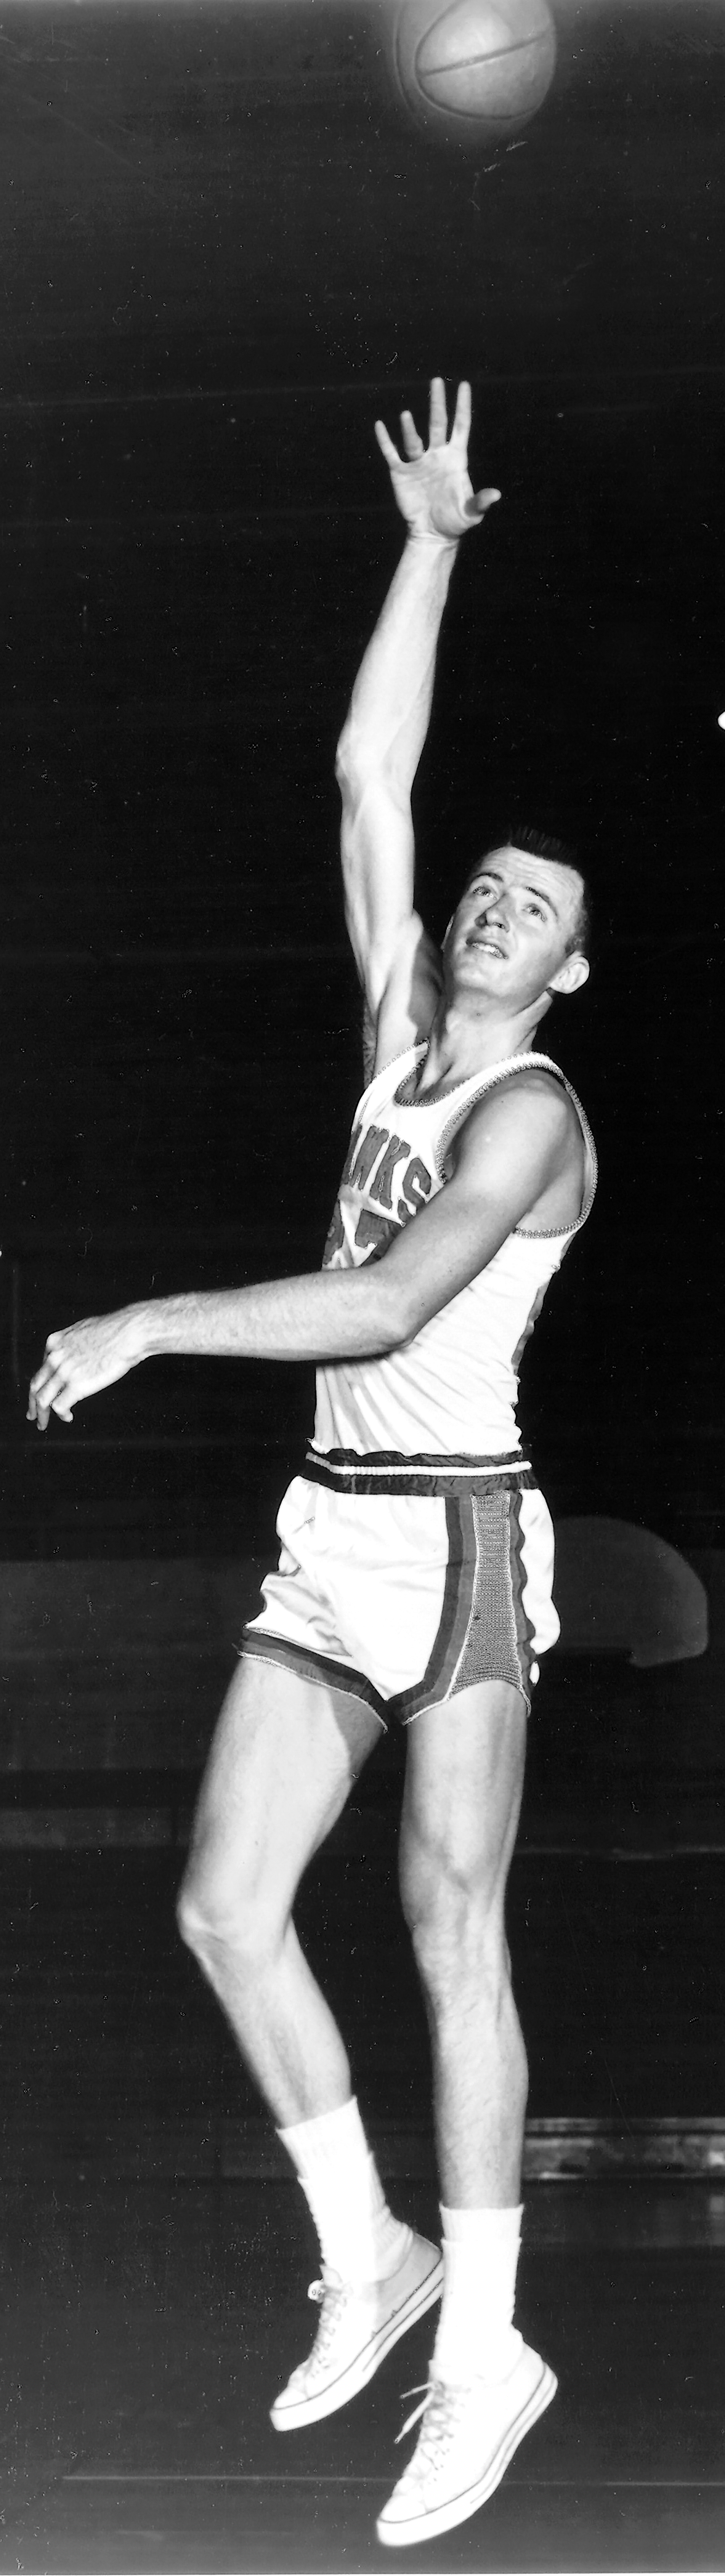 Hub Reed played for four NBA teams before coming to El Reno as an educator. (Courtesy photo/NBA)